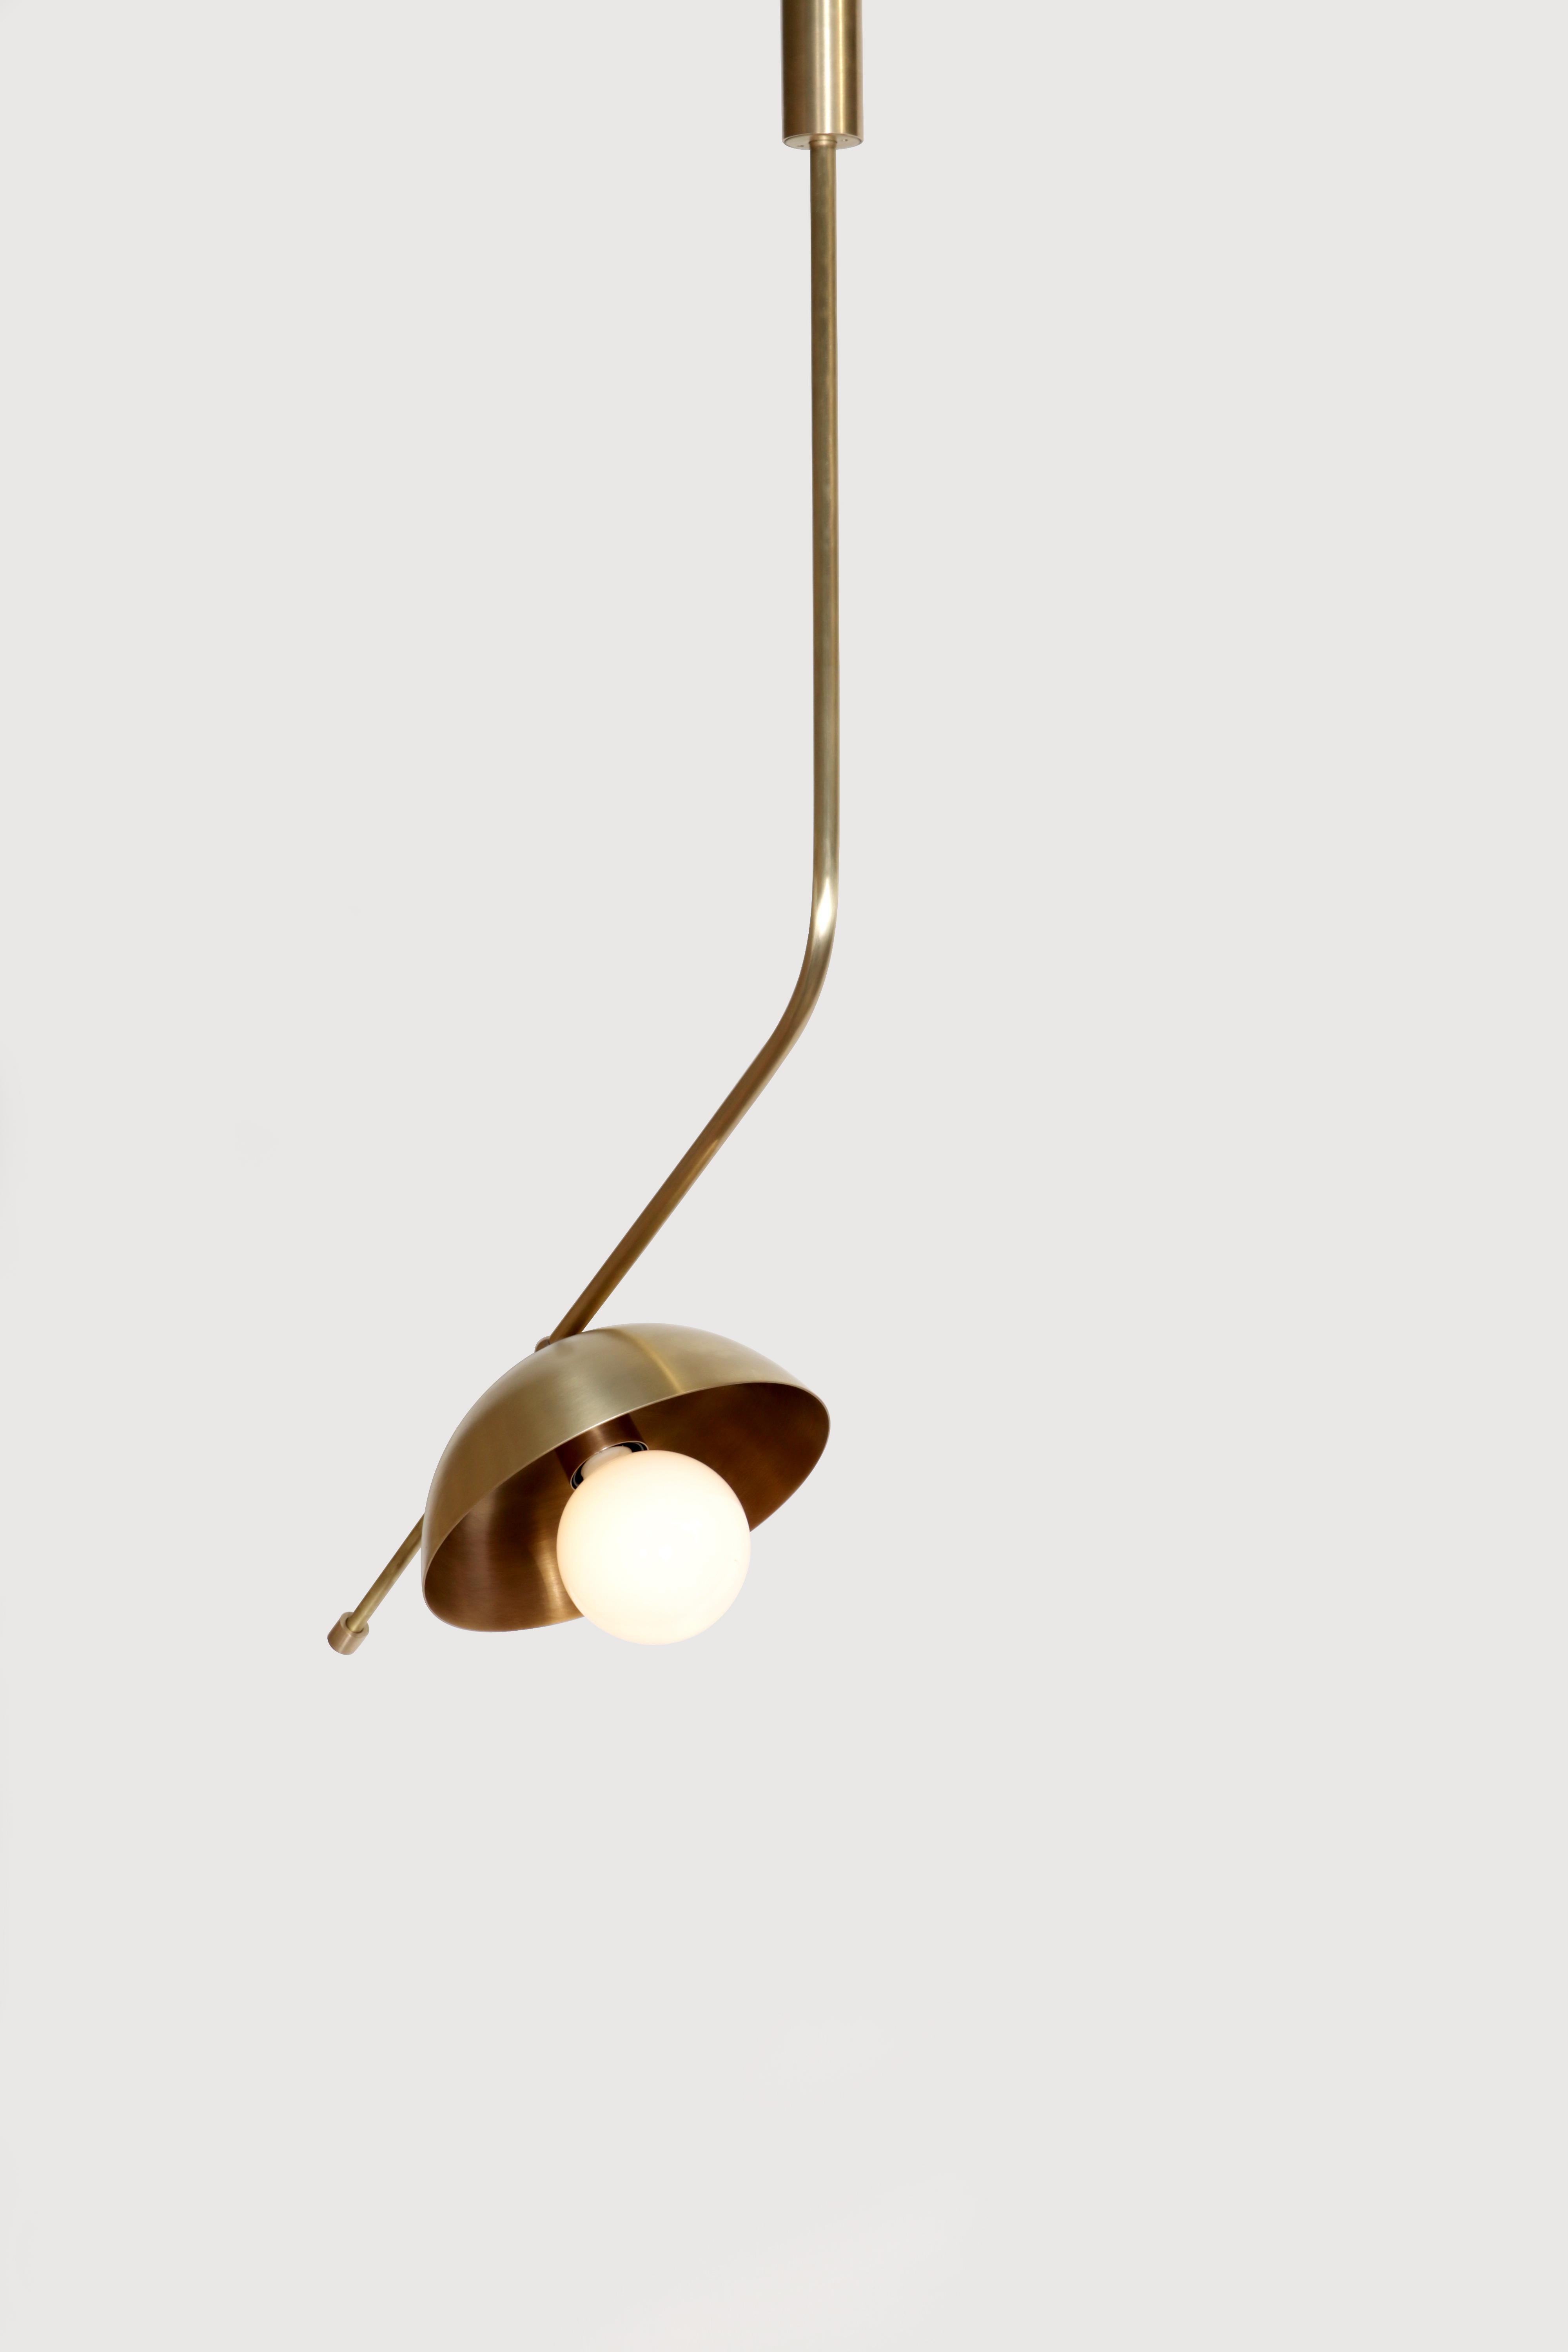 Wing 1 Brass Dome Pendant Lamp by Lamp Shaper
Dimensions: D 53.5 x W 53.5 x H 114.5 cm.
Materials: Brass.

Different finishes available: raw brass, aged brass, burnt brass and brushed brass Please contact us.

All our lamps can be wired according to